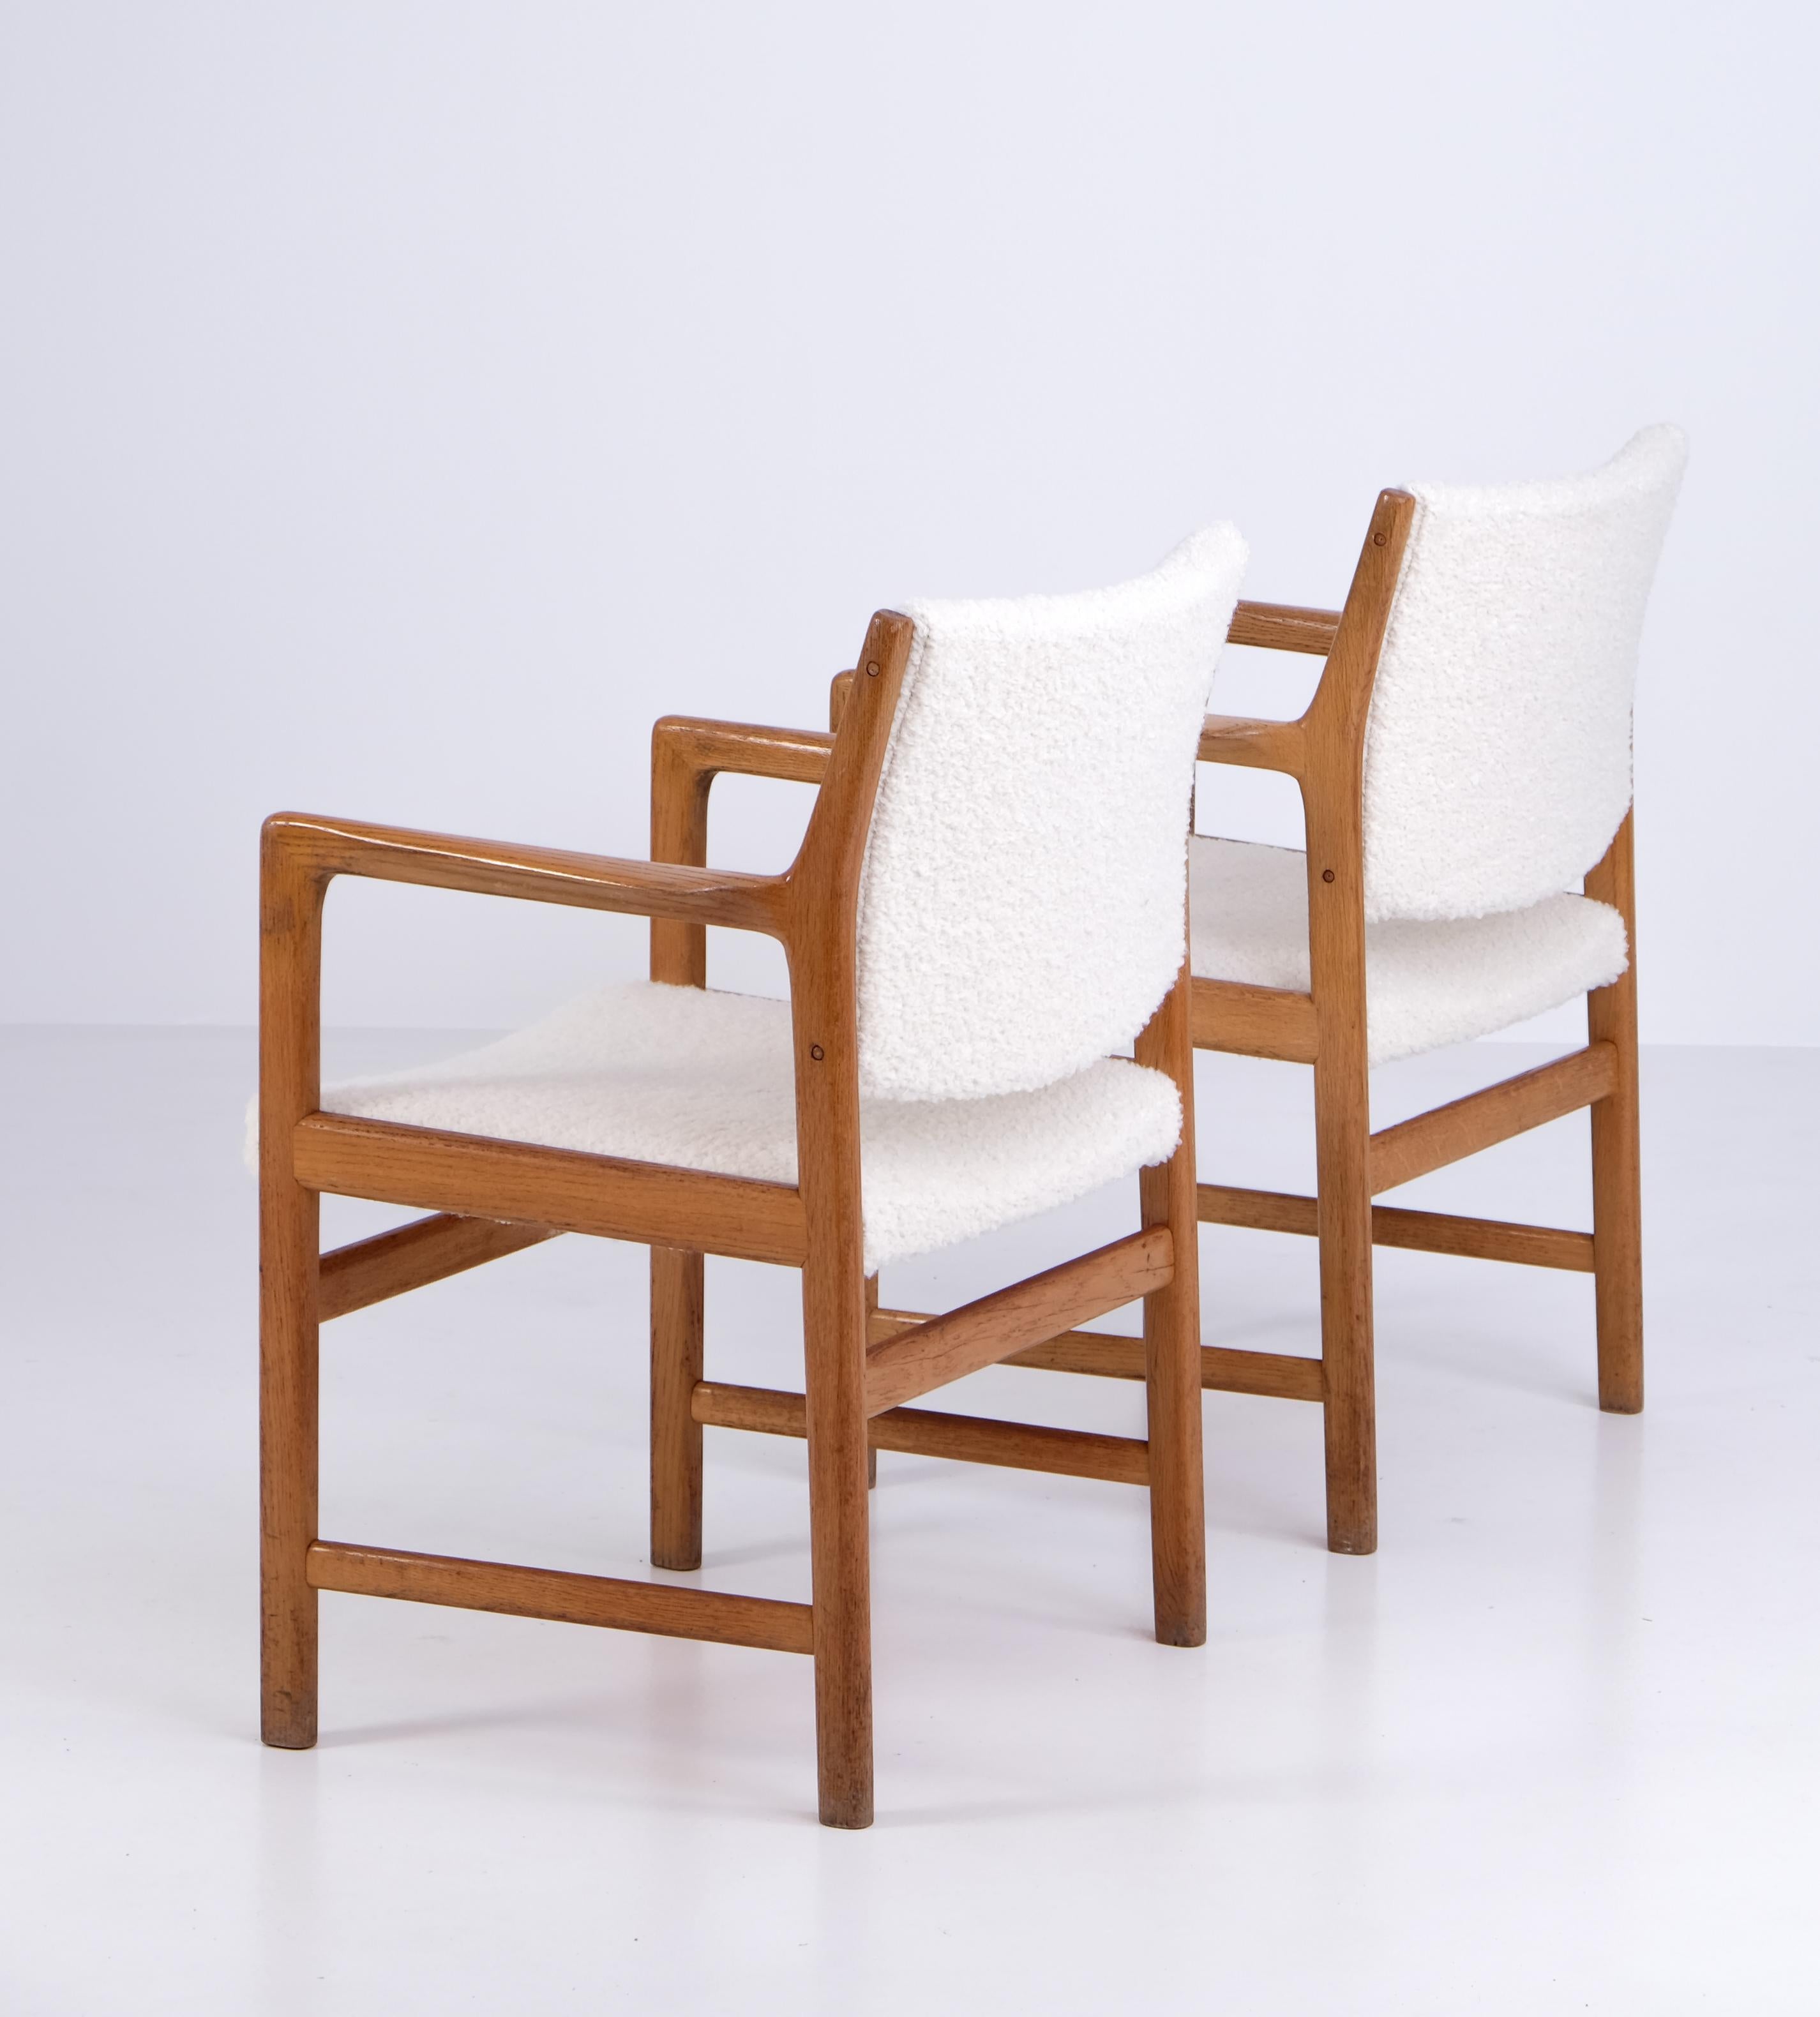 Armchairs designed by Karl-Erik Ekselius, produced by JOC in Vetlanda, Sweden, 1960s.
Solid oak frame and newly upholstered cushions.
Set of 10 chairs available. Listed price is for a pair.
 